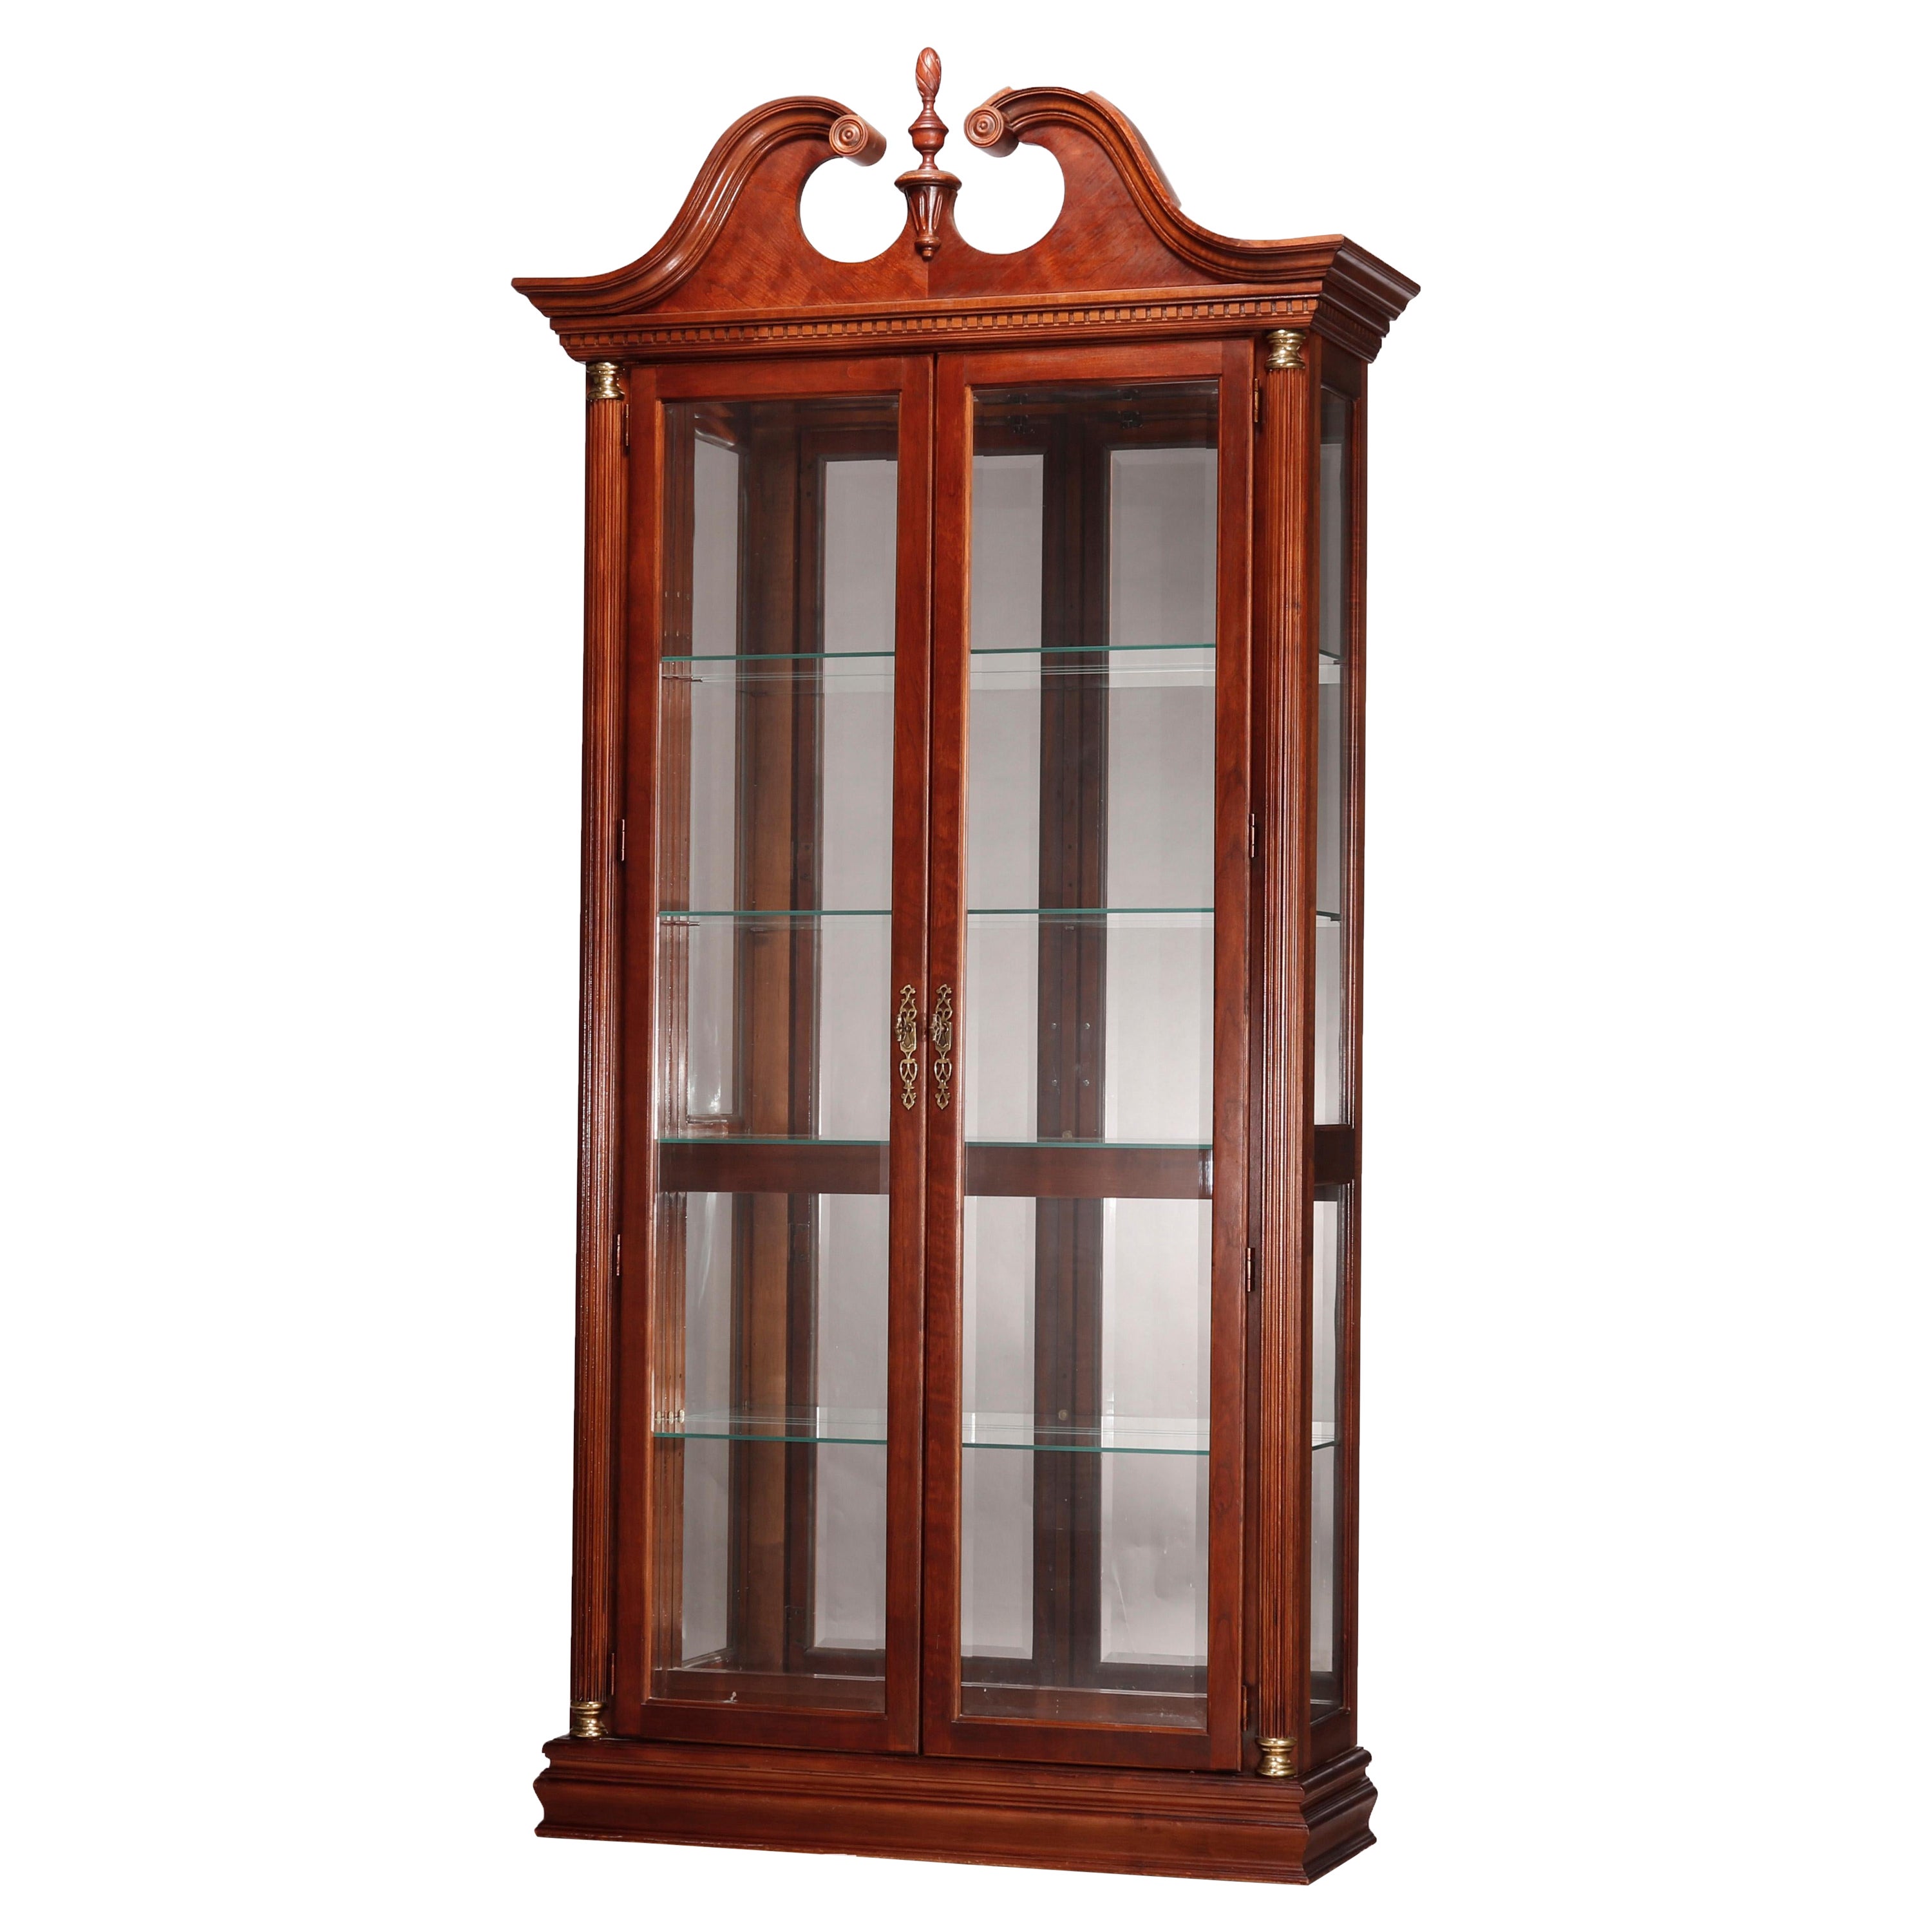 Federal Style Carved Mahogany Mirrored Display Cabinet by Pulaski, 20th C